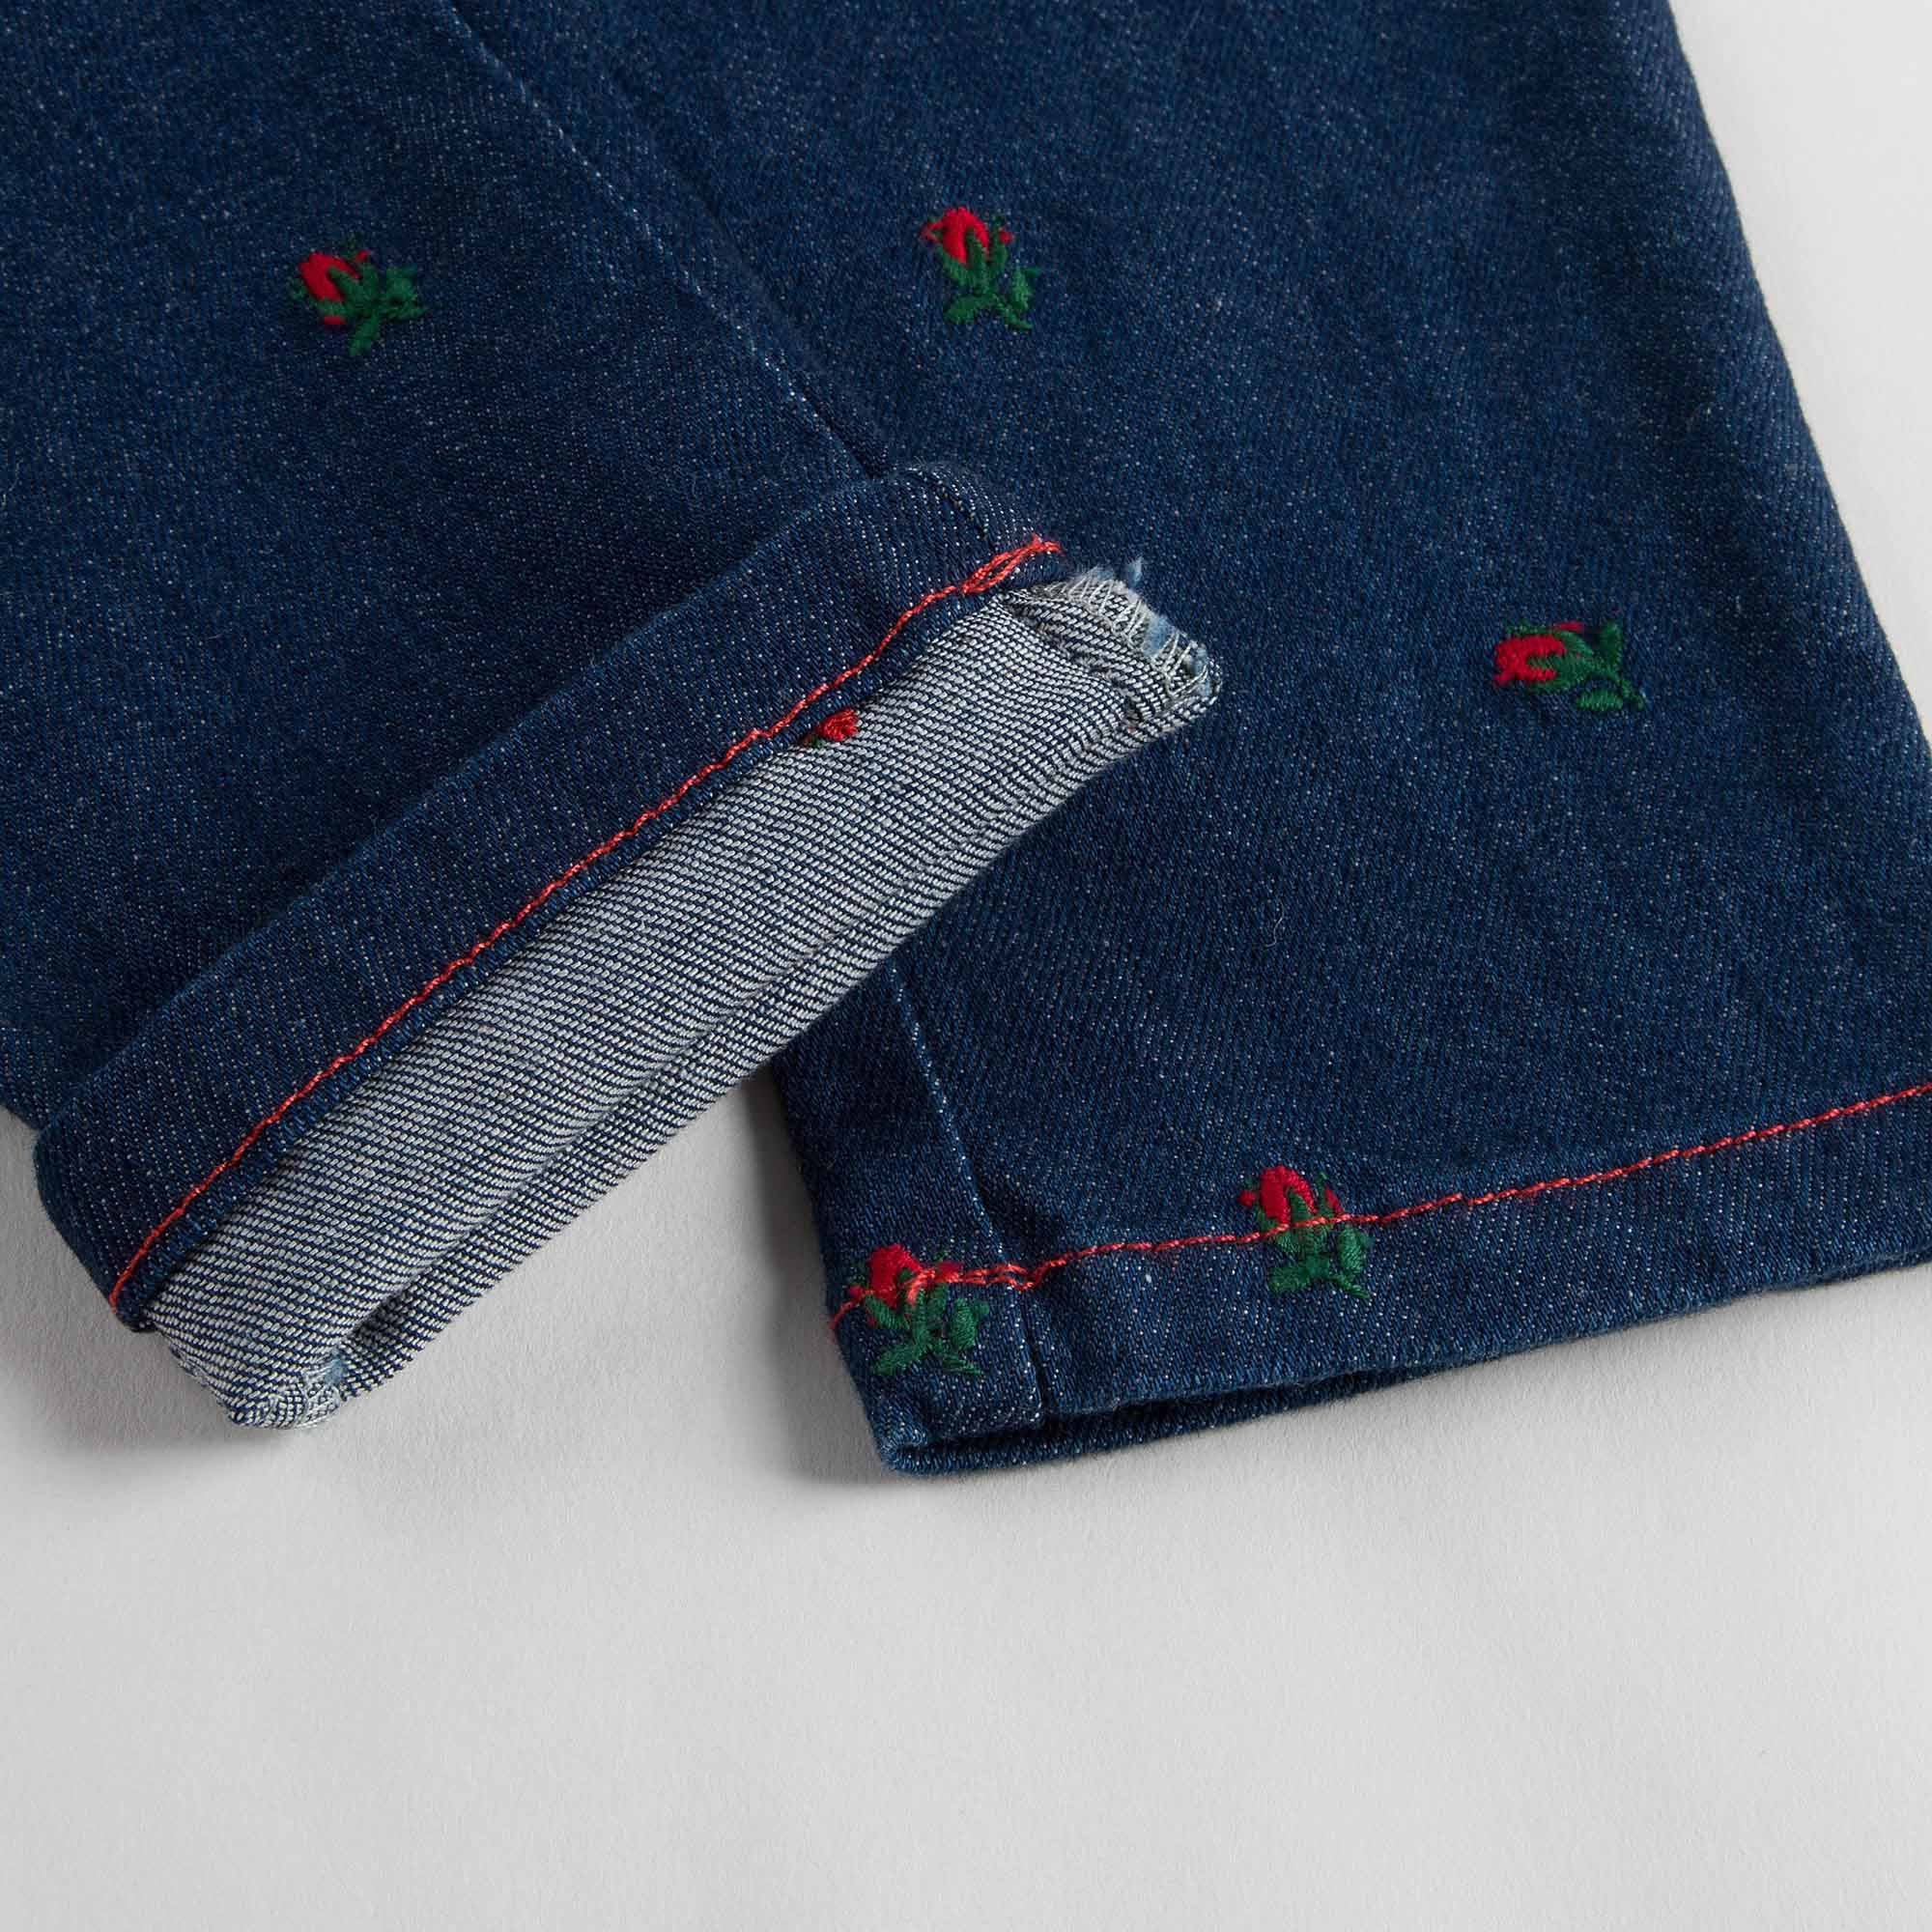 Baby Girls Blue Denim Jeans With Red Embroidered Flower Trims - CÉMAROSE | Children's Fashion Store - 6